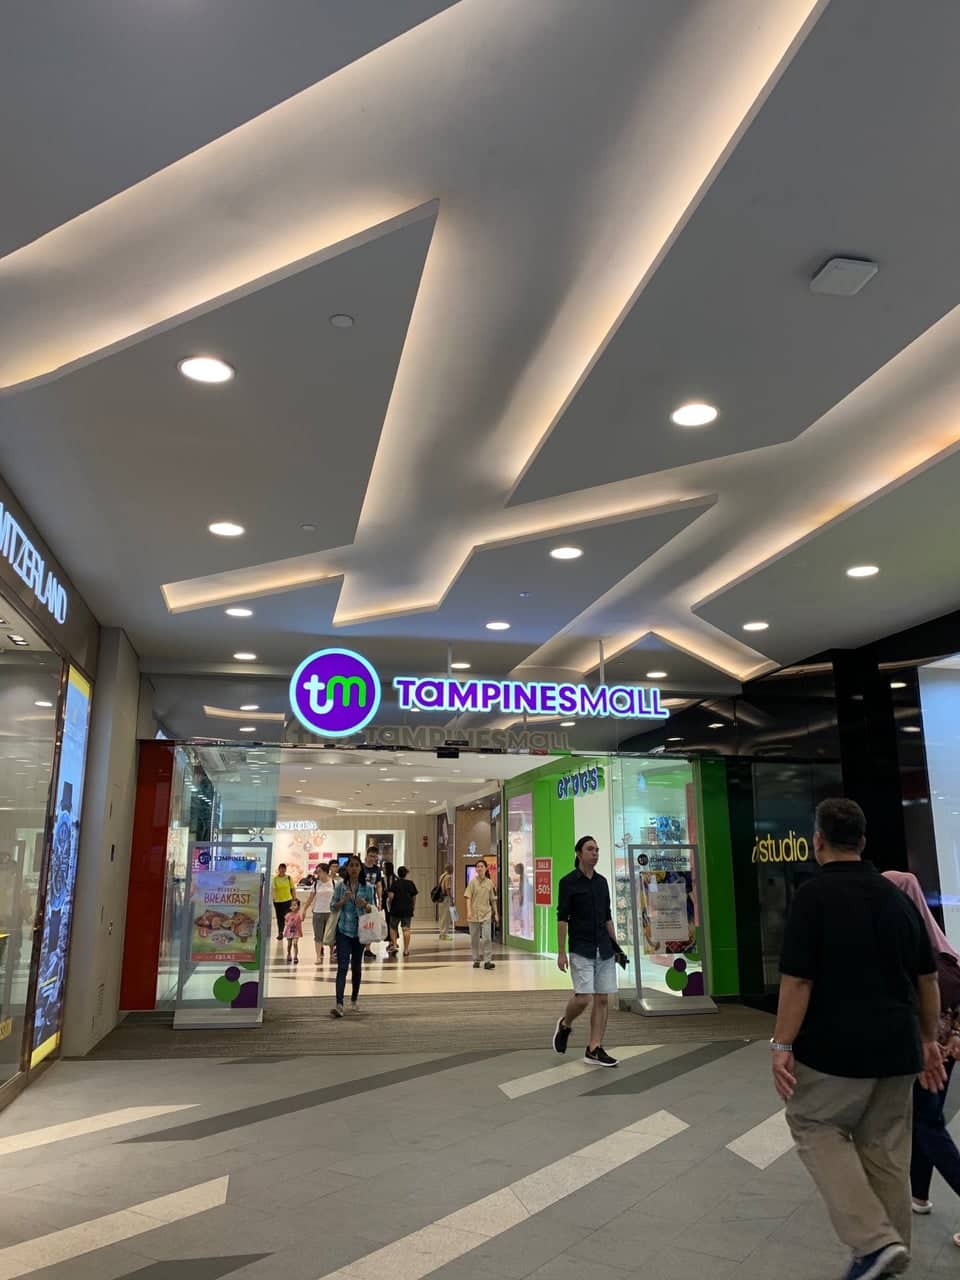 Tampines Mall Entrance